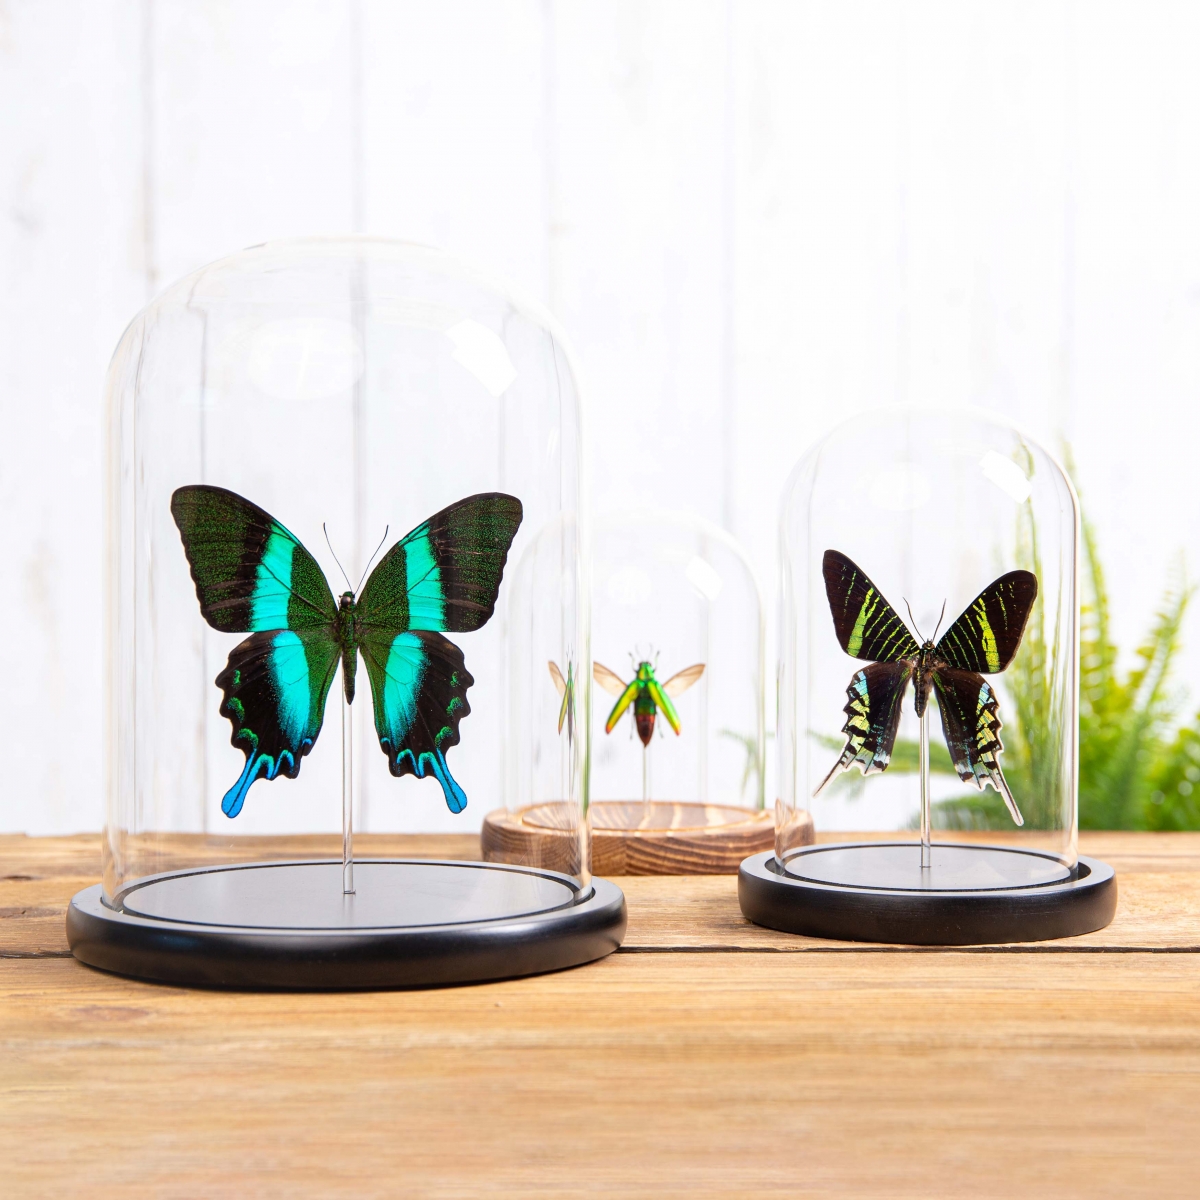 The Garden Tiger Moth in Glass Dome with Wooden Base (Arctia caja)